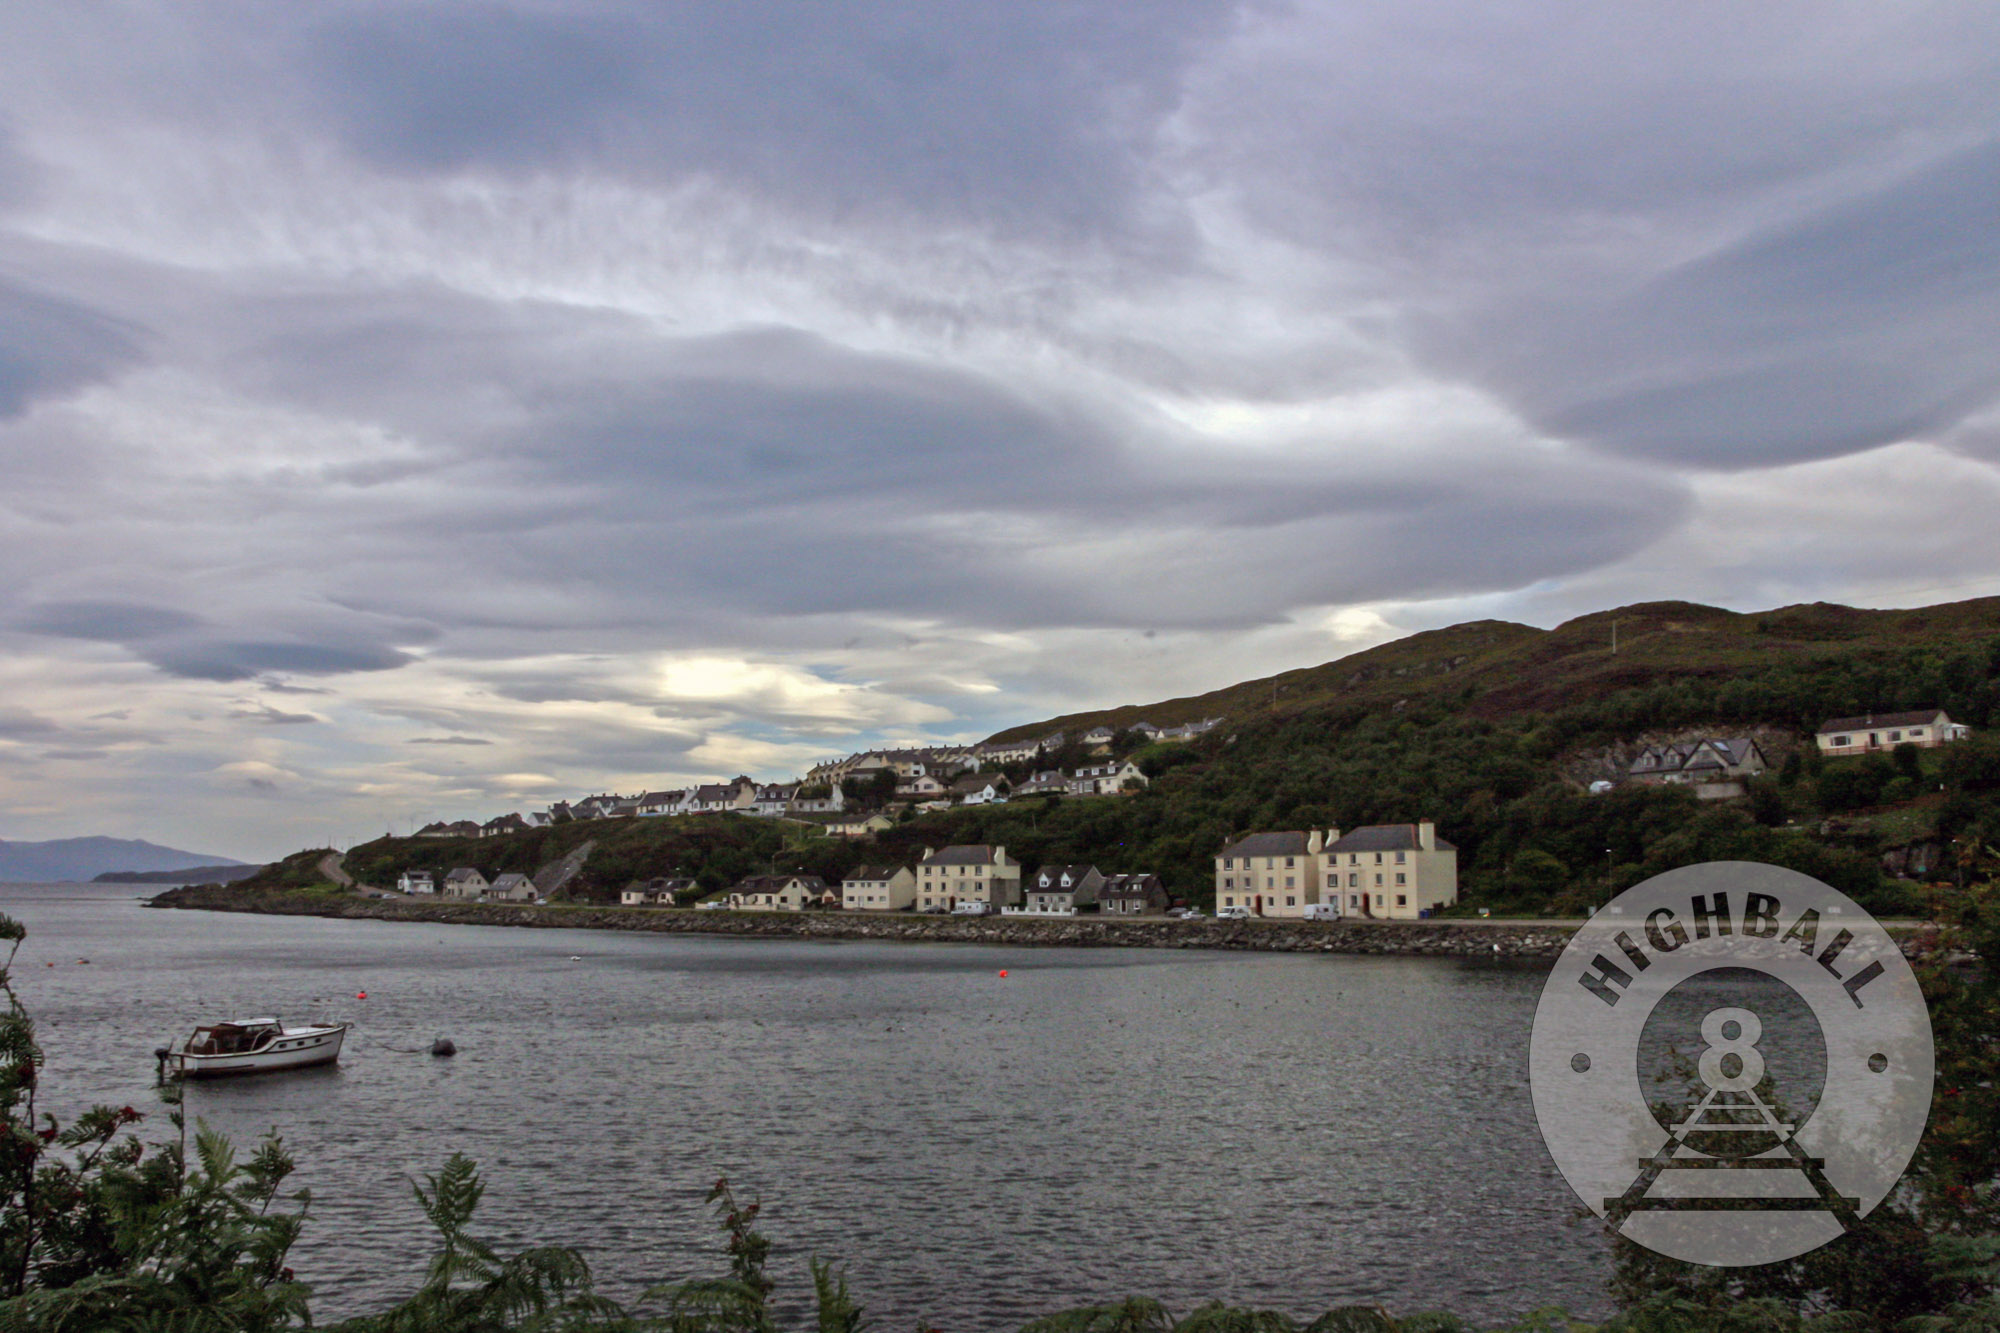 View of the town and harbor, Mallaig, Scotland, UK, 2010.